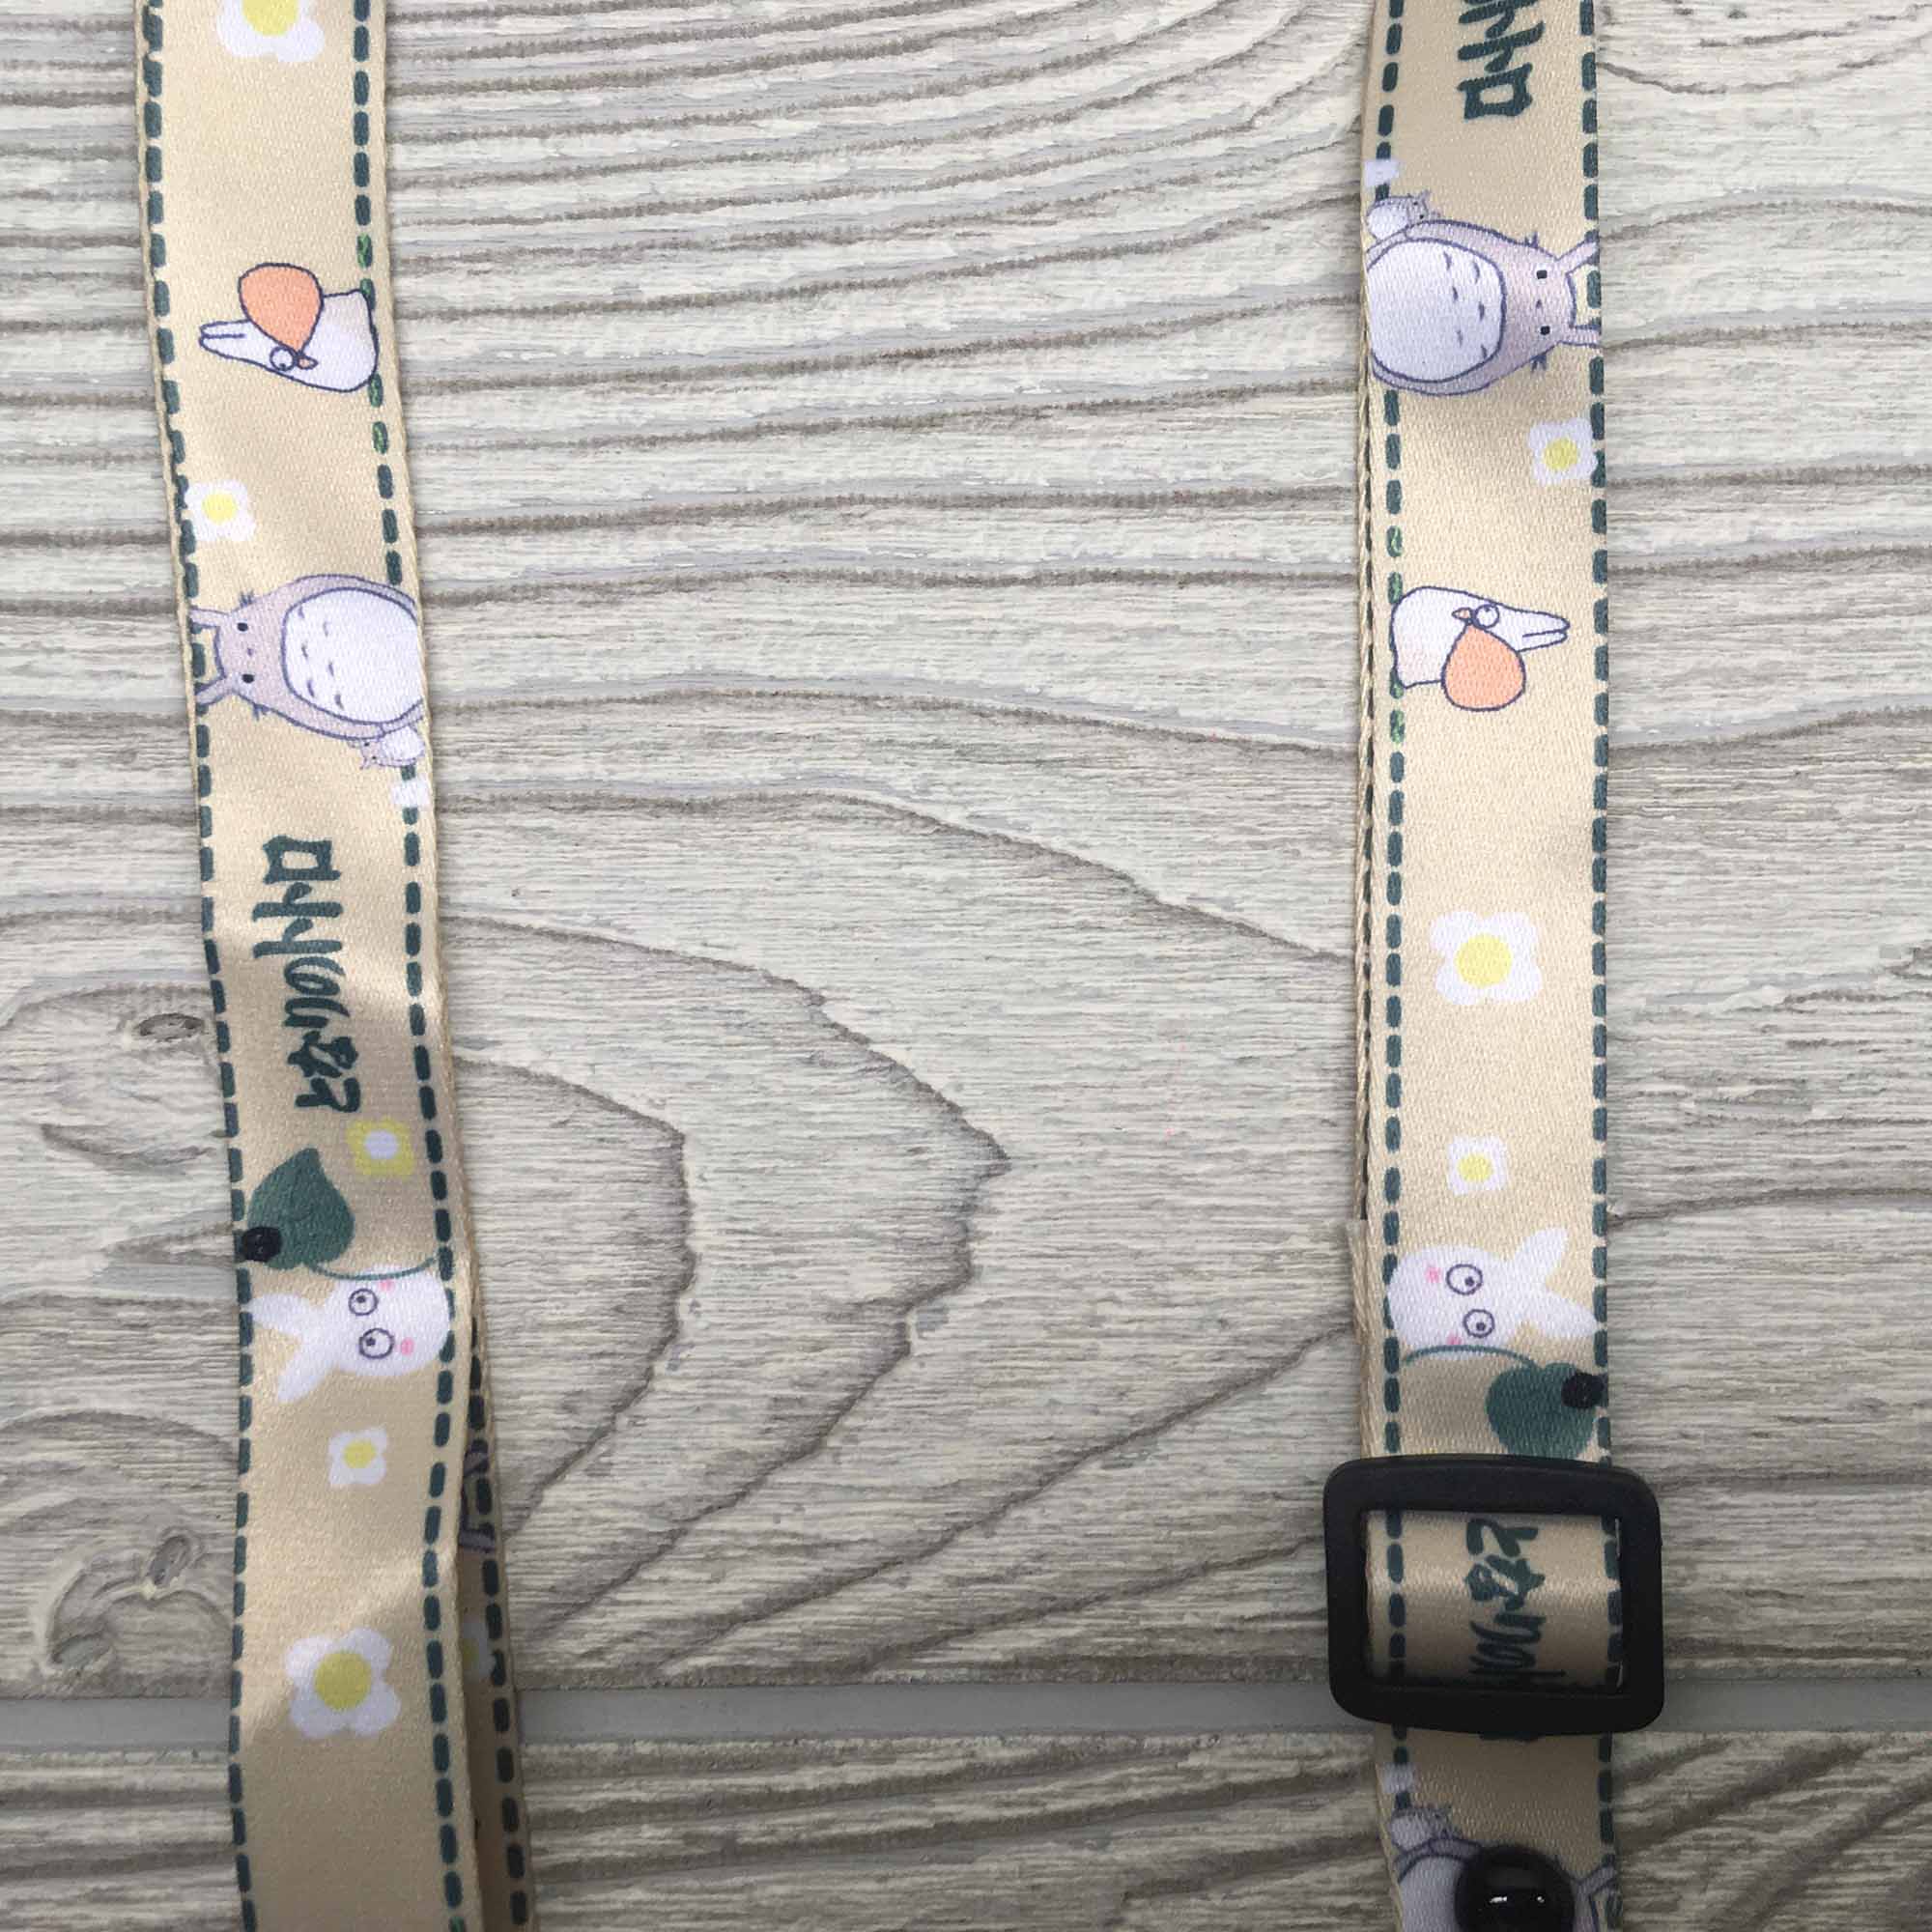 Face Mask Strap Holder Adjustable for Kids and Adults - My Neighbor Totoro